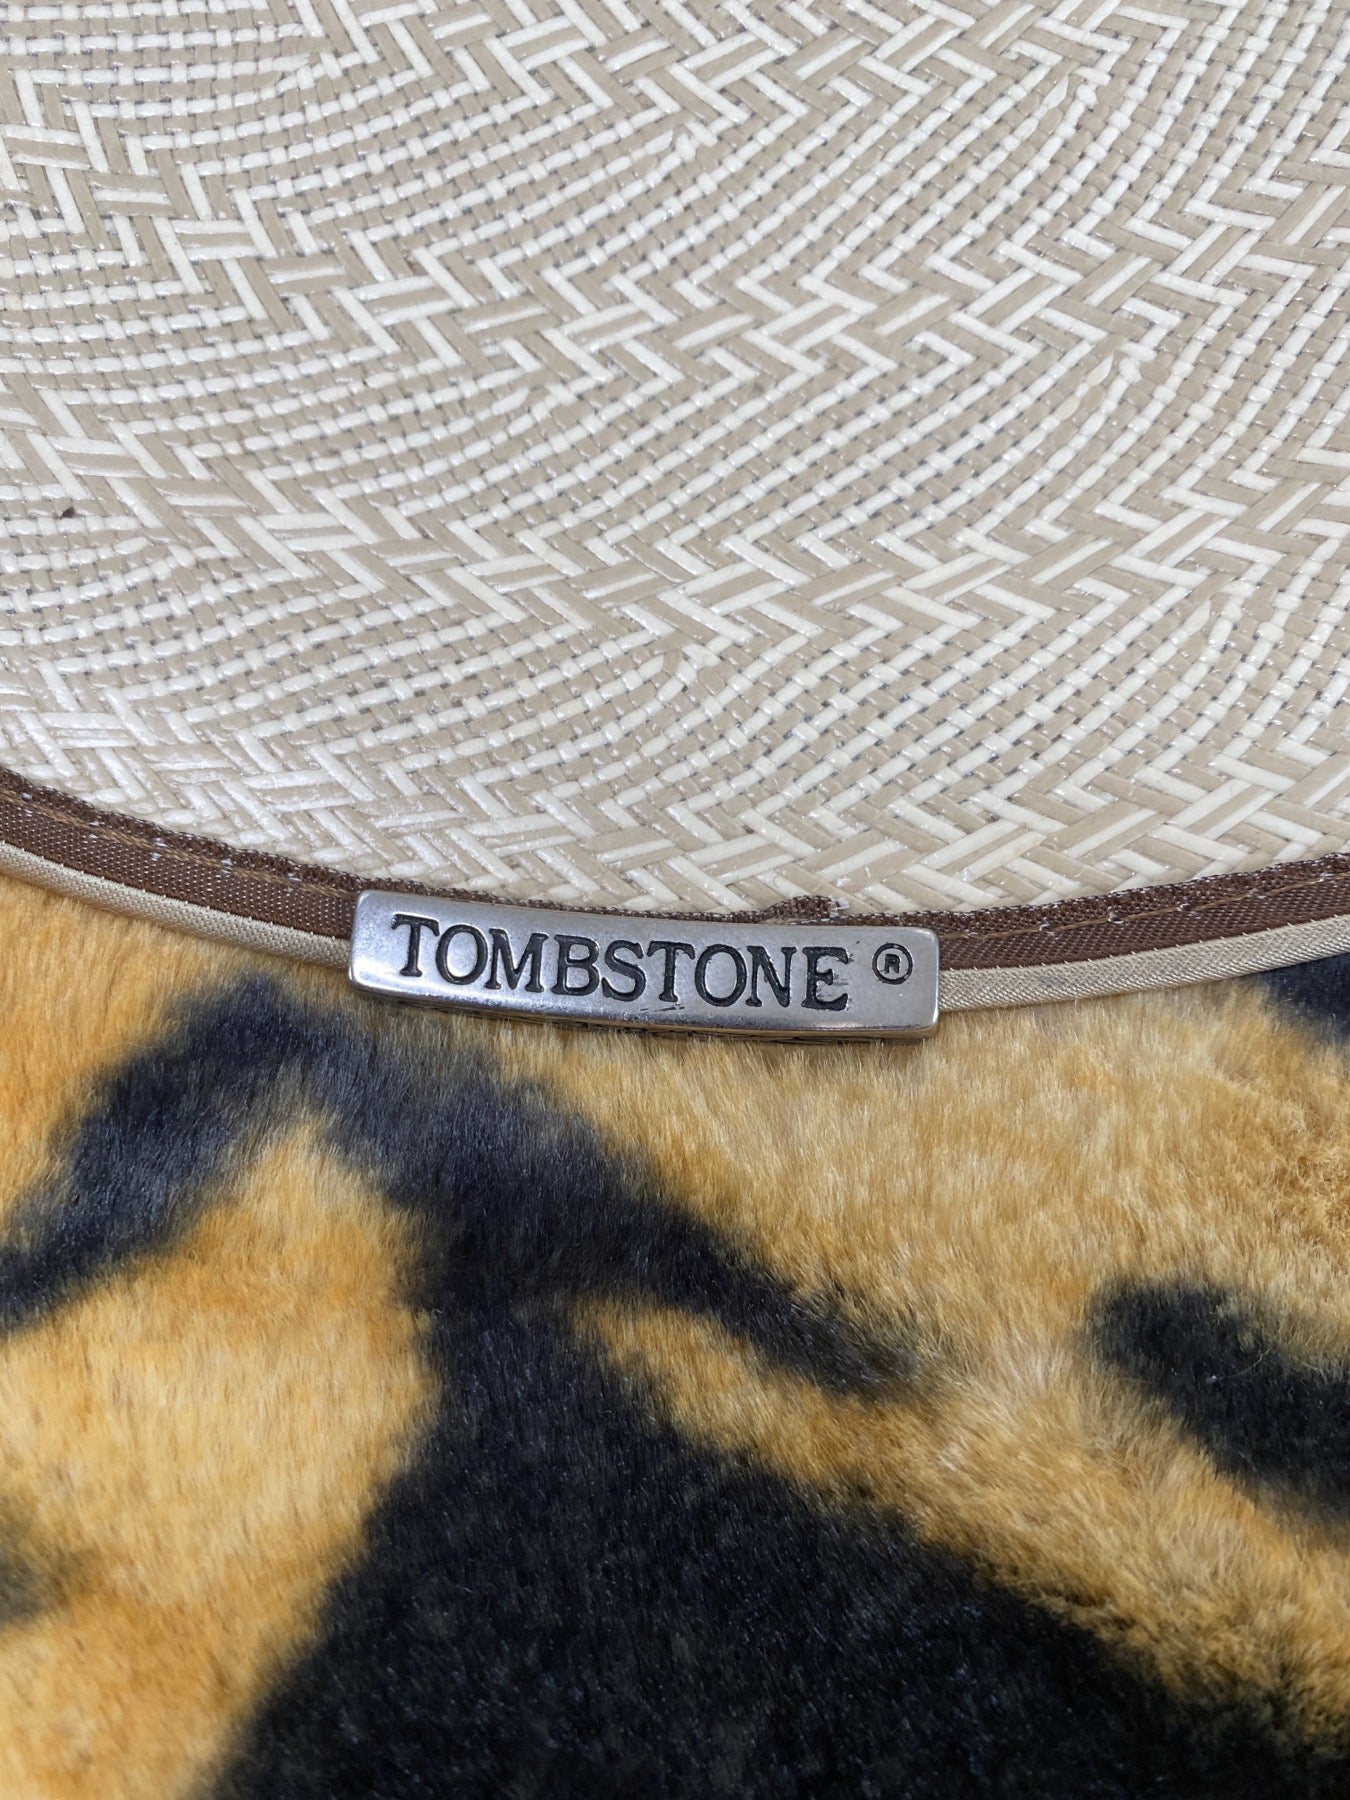 TOMBSTONE WOVEN WESTERN HAT